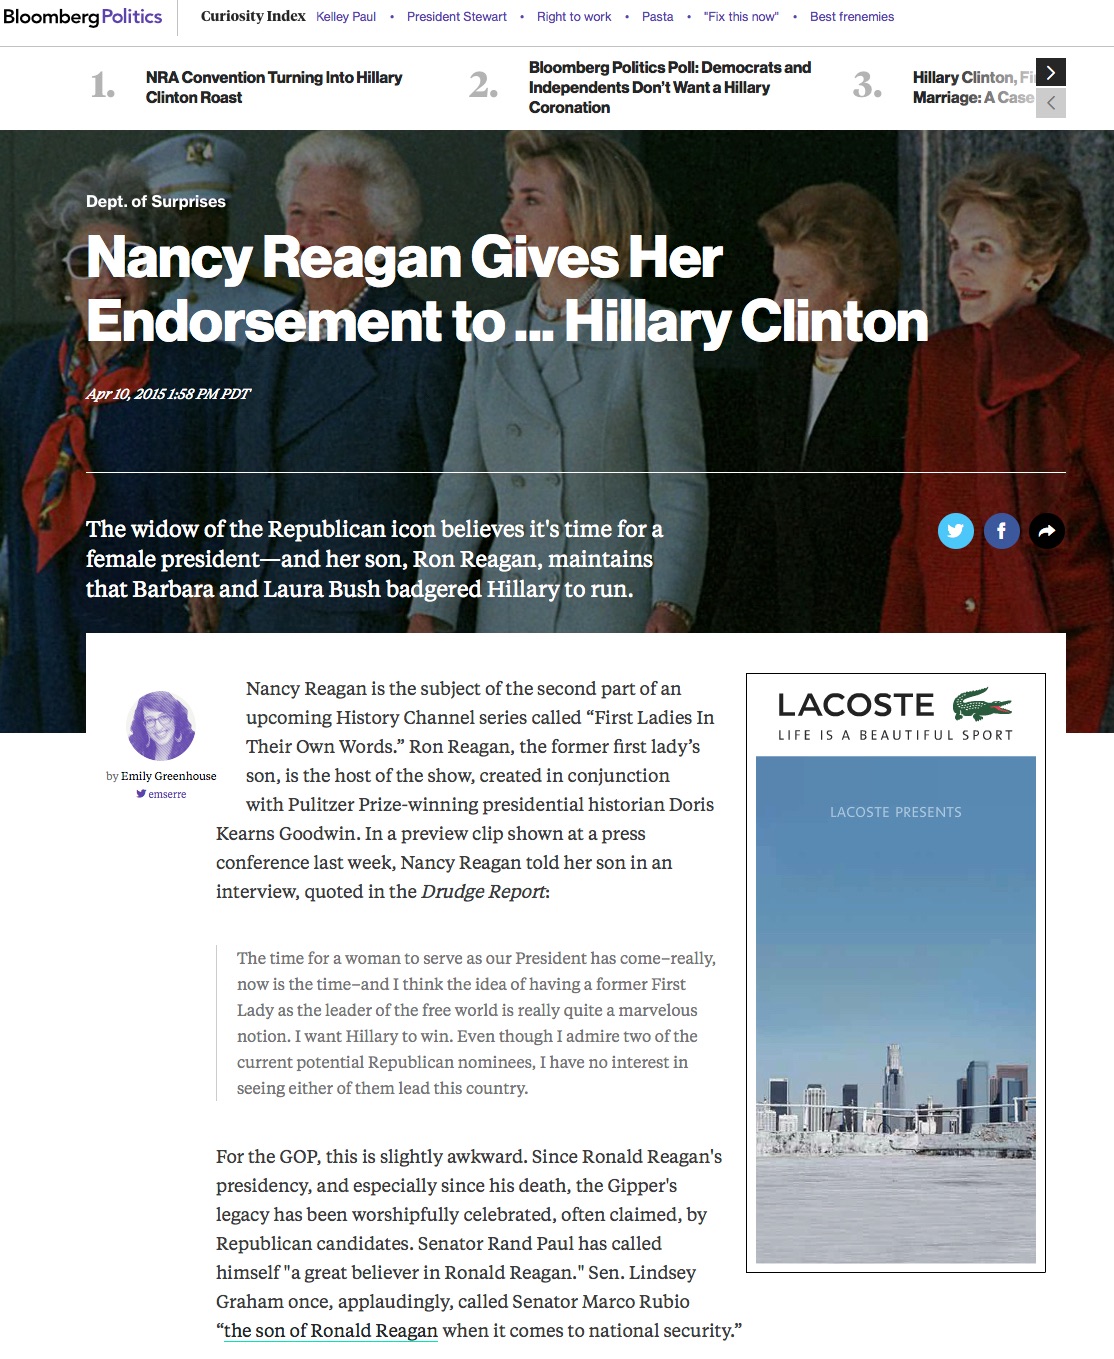 Bloomberg News Falls for Fake Story About Nancy Reagan Endorsing Hillary Clinton ...